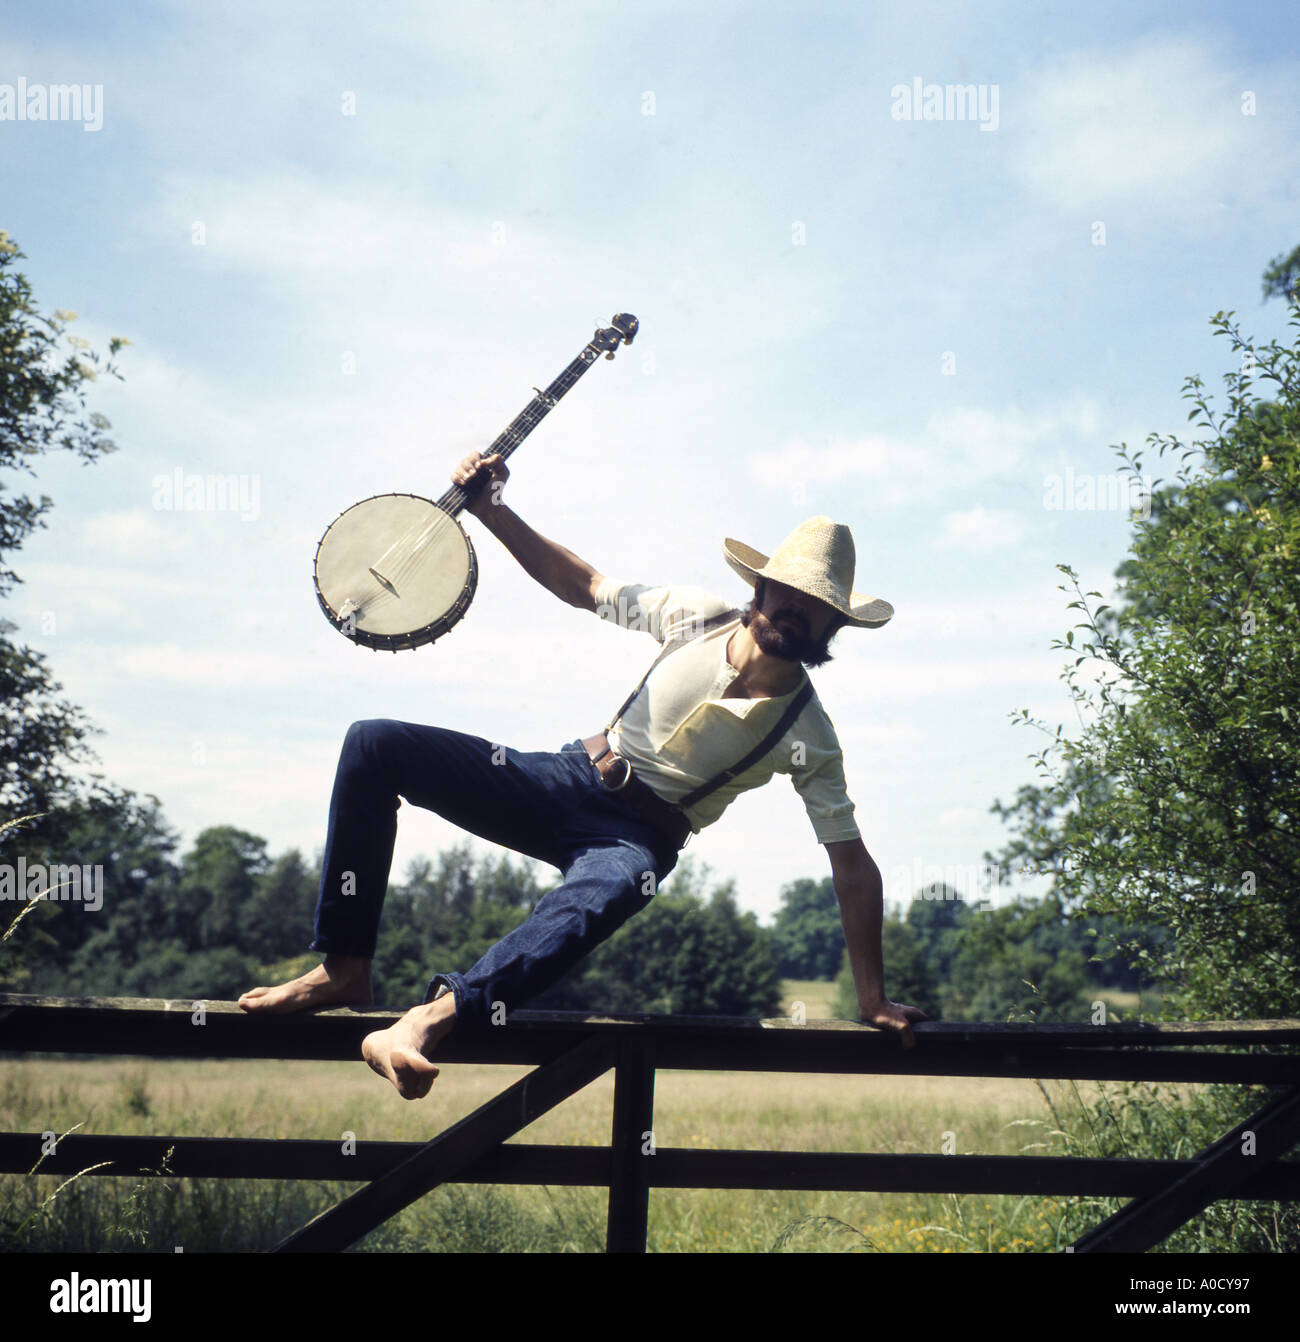 Man Leaping Over a Gate Holding a Banjo Aloft Stock Photo